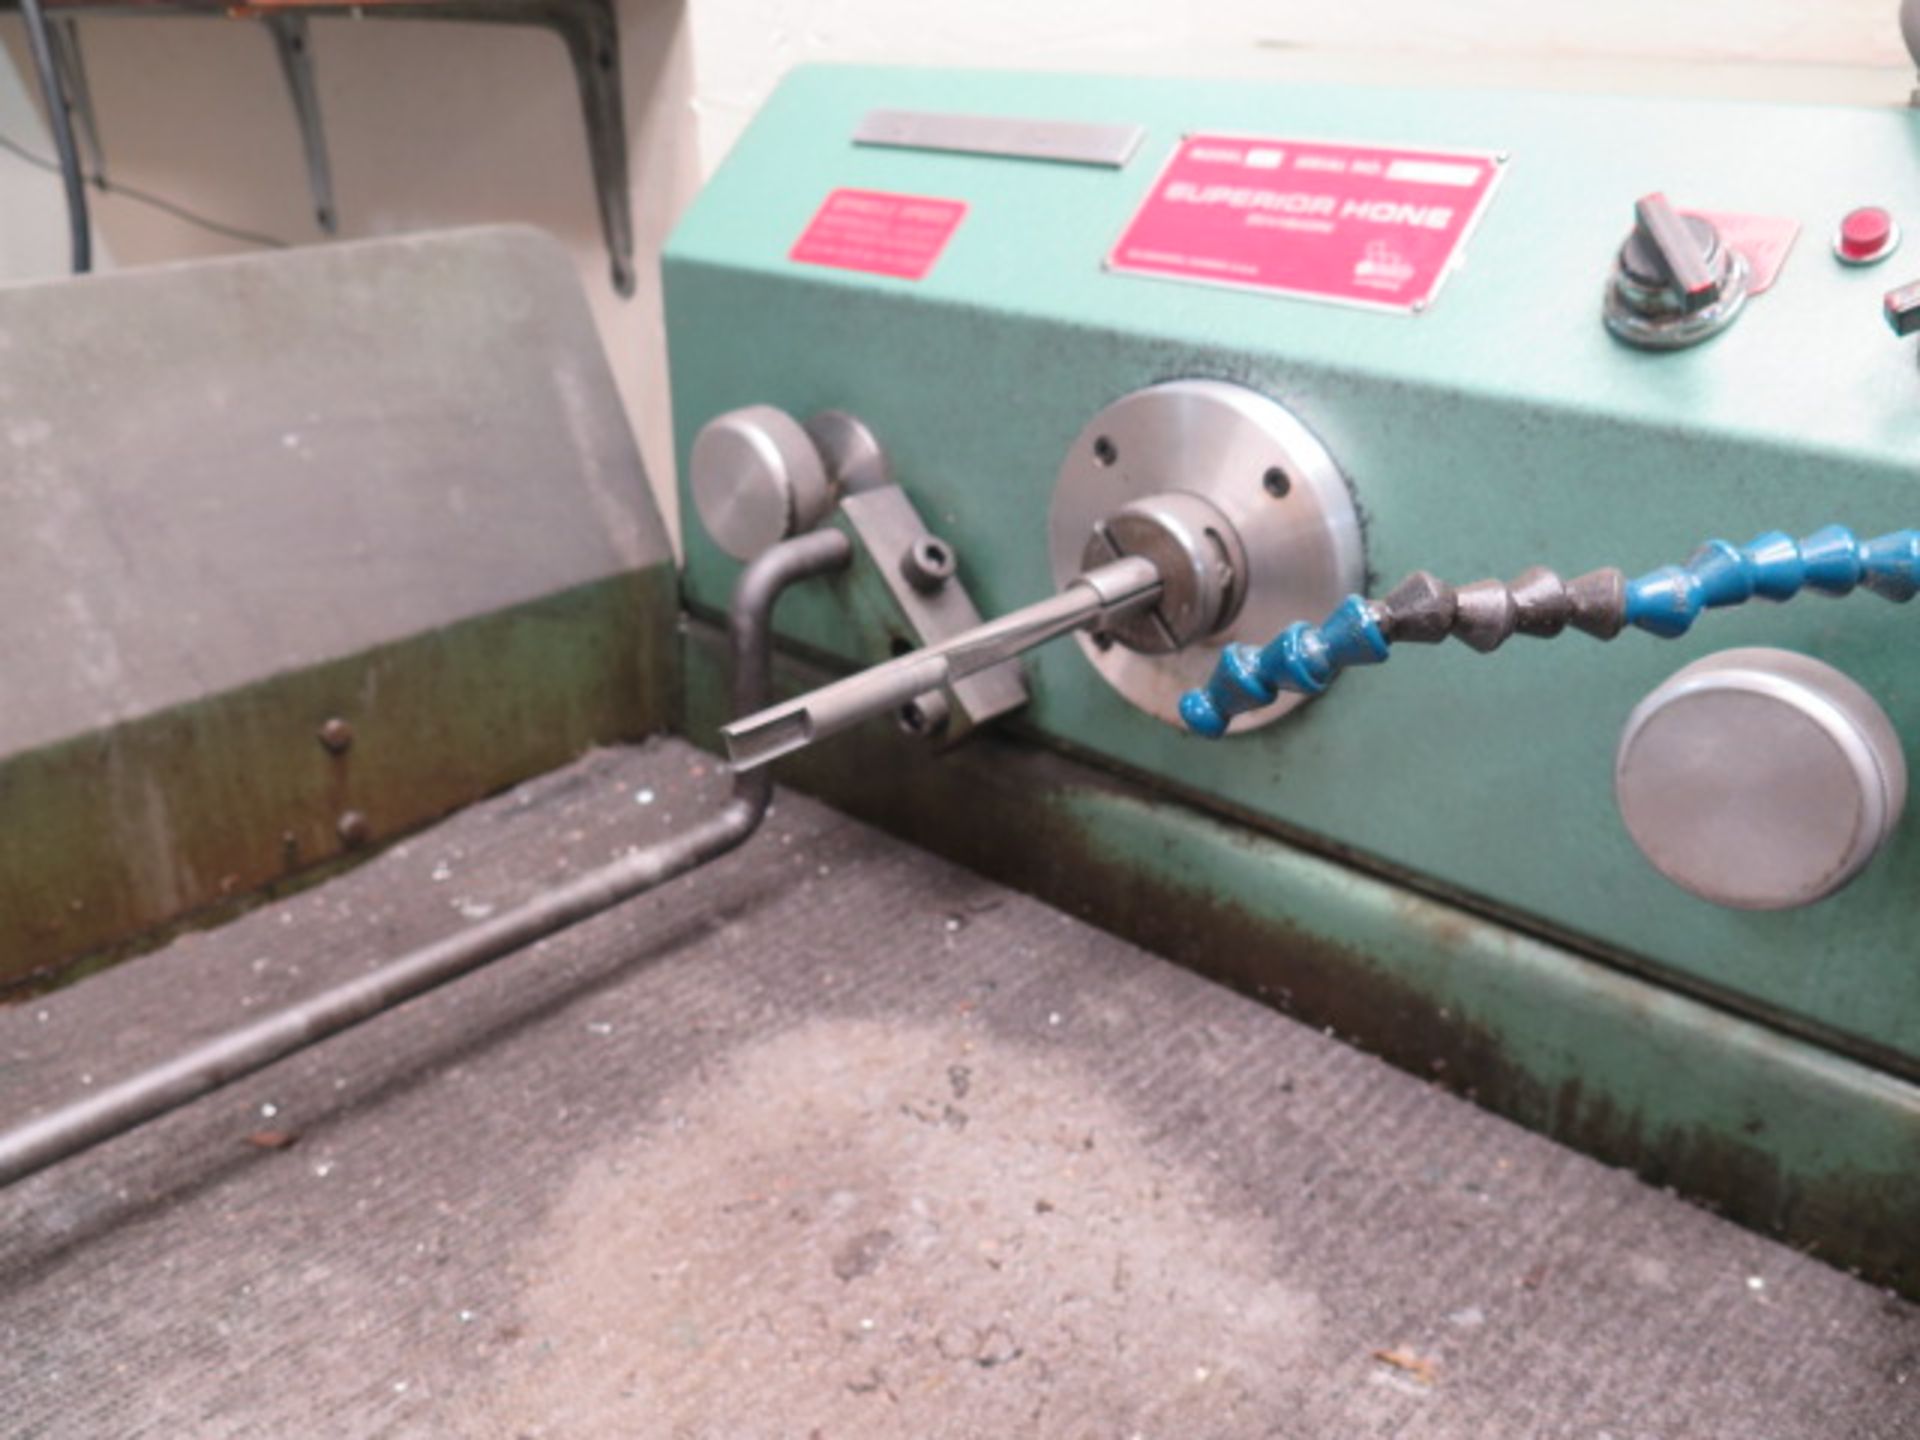 Superior Hone mdl. BHXL Bench Model Honing Machine s/n 86-066 w/ 500-1850 Adjustable RPM, Coolanf, - Image 4 of 7